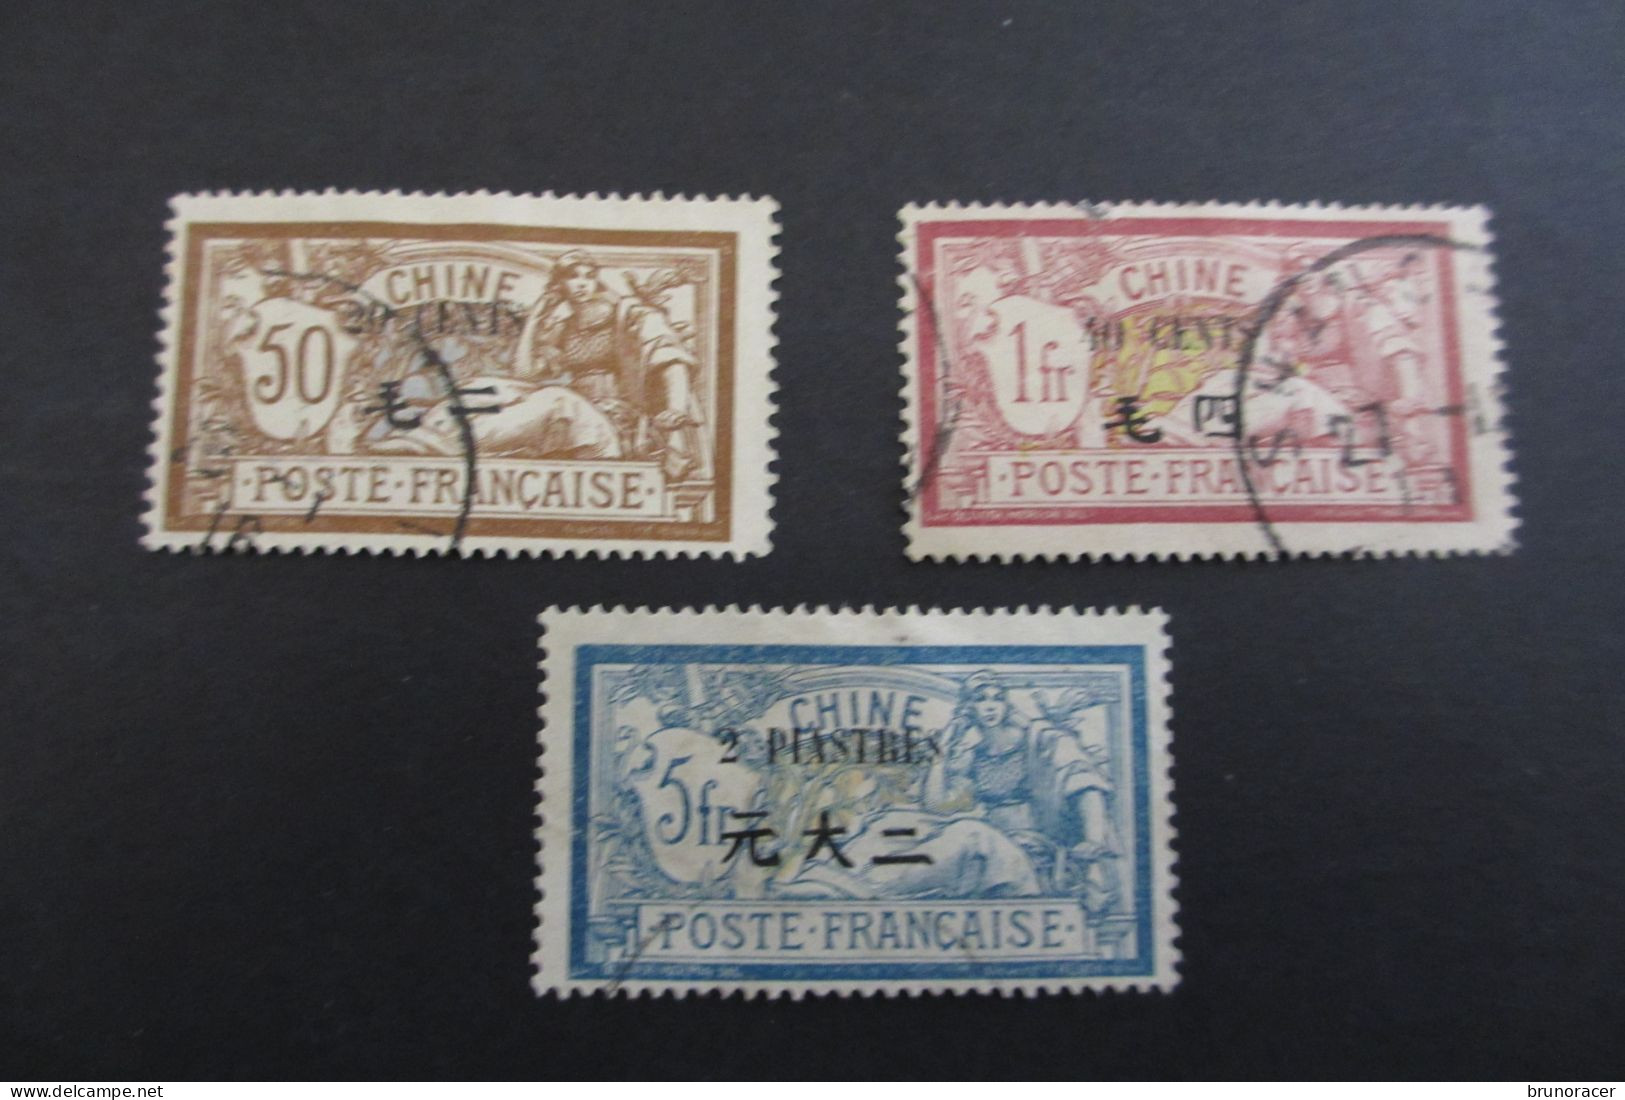 CHINE BFE N°80 à 82 Oblit. TB  COTE 45 EUROS VOIR SCANS - Used Stamps